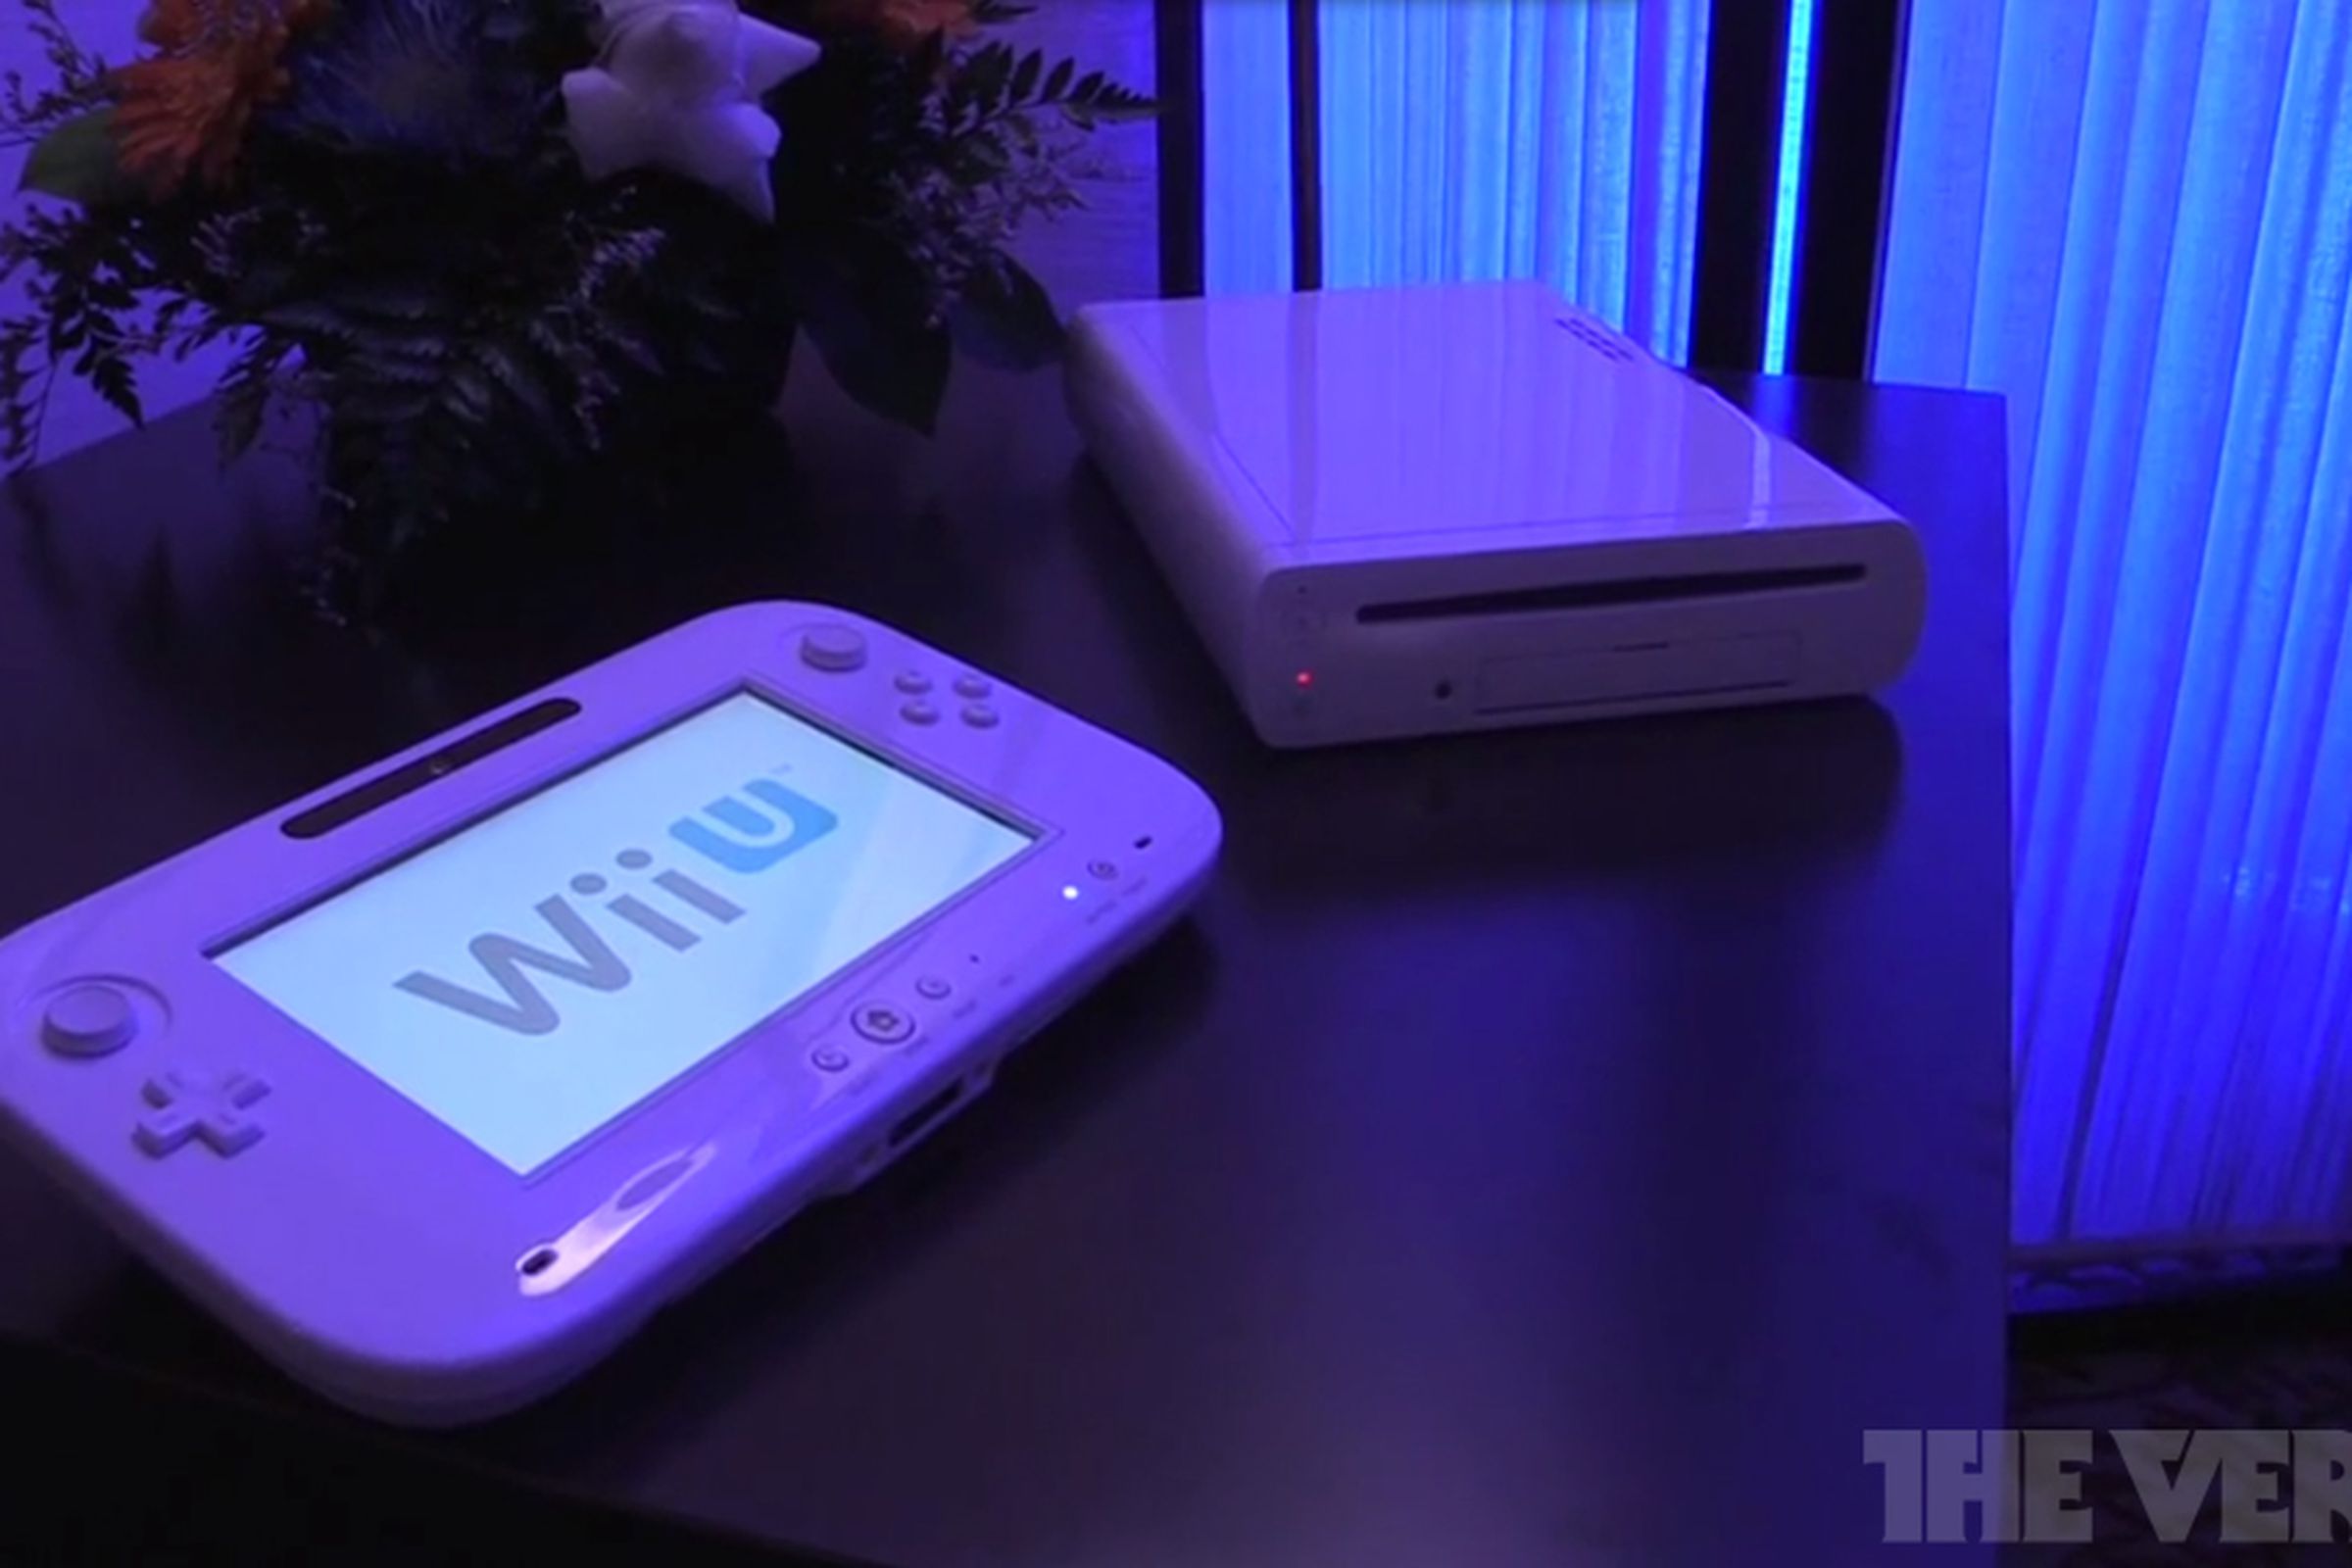 Wii U hardware and flowers